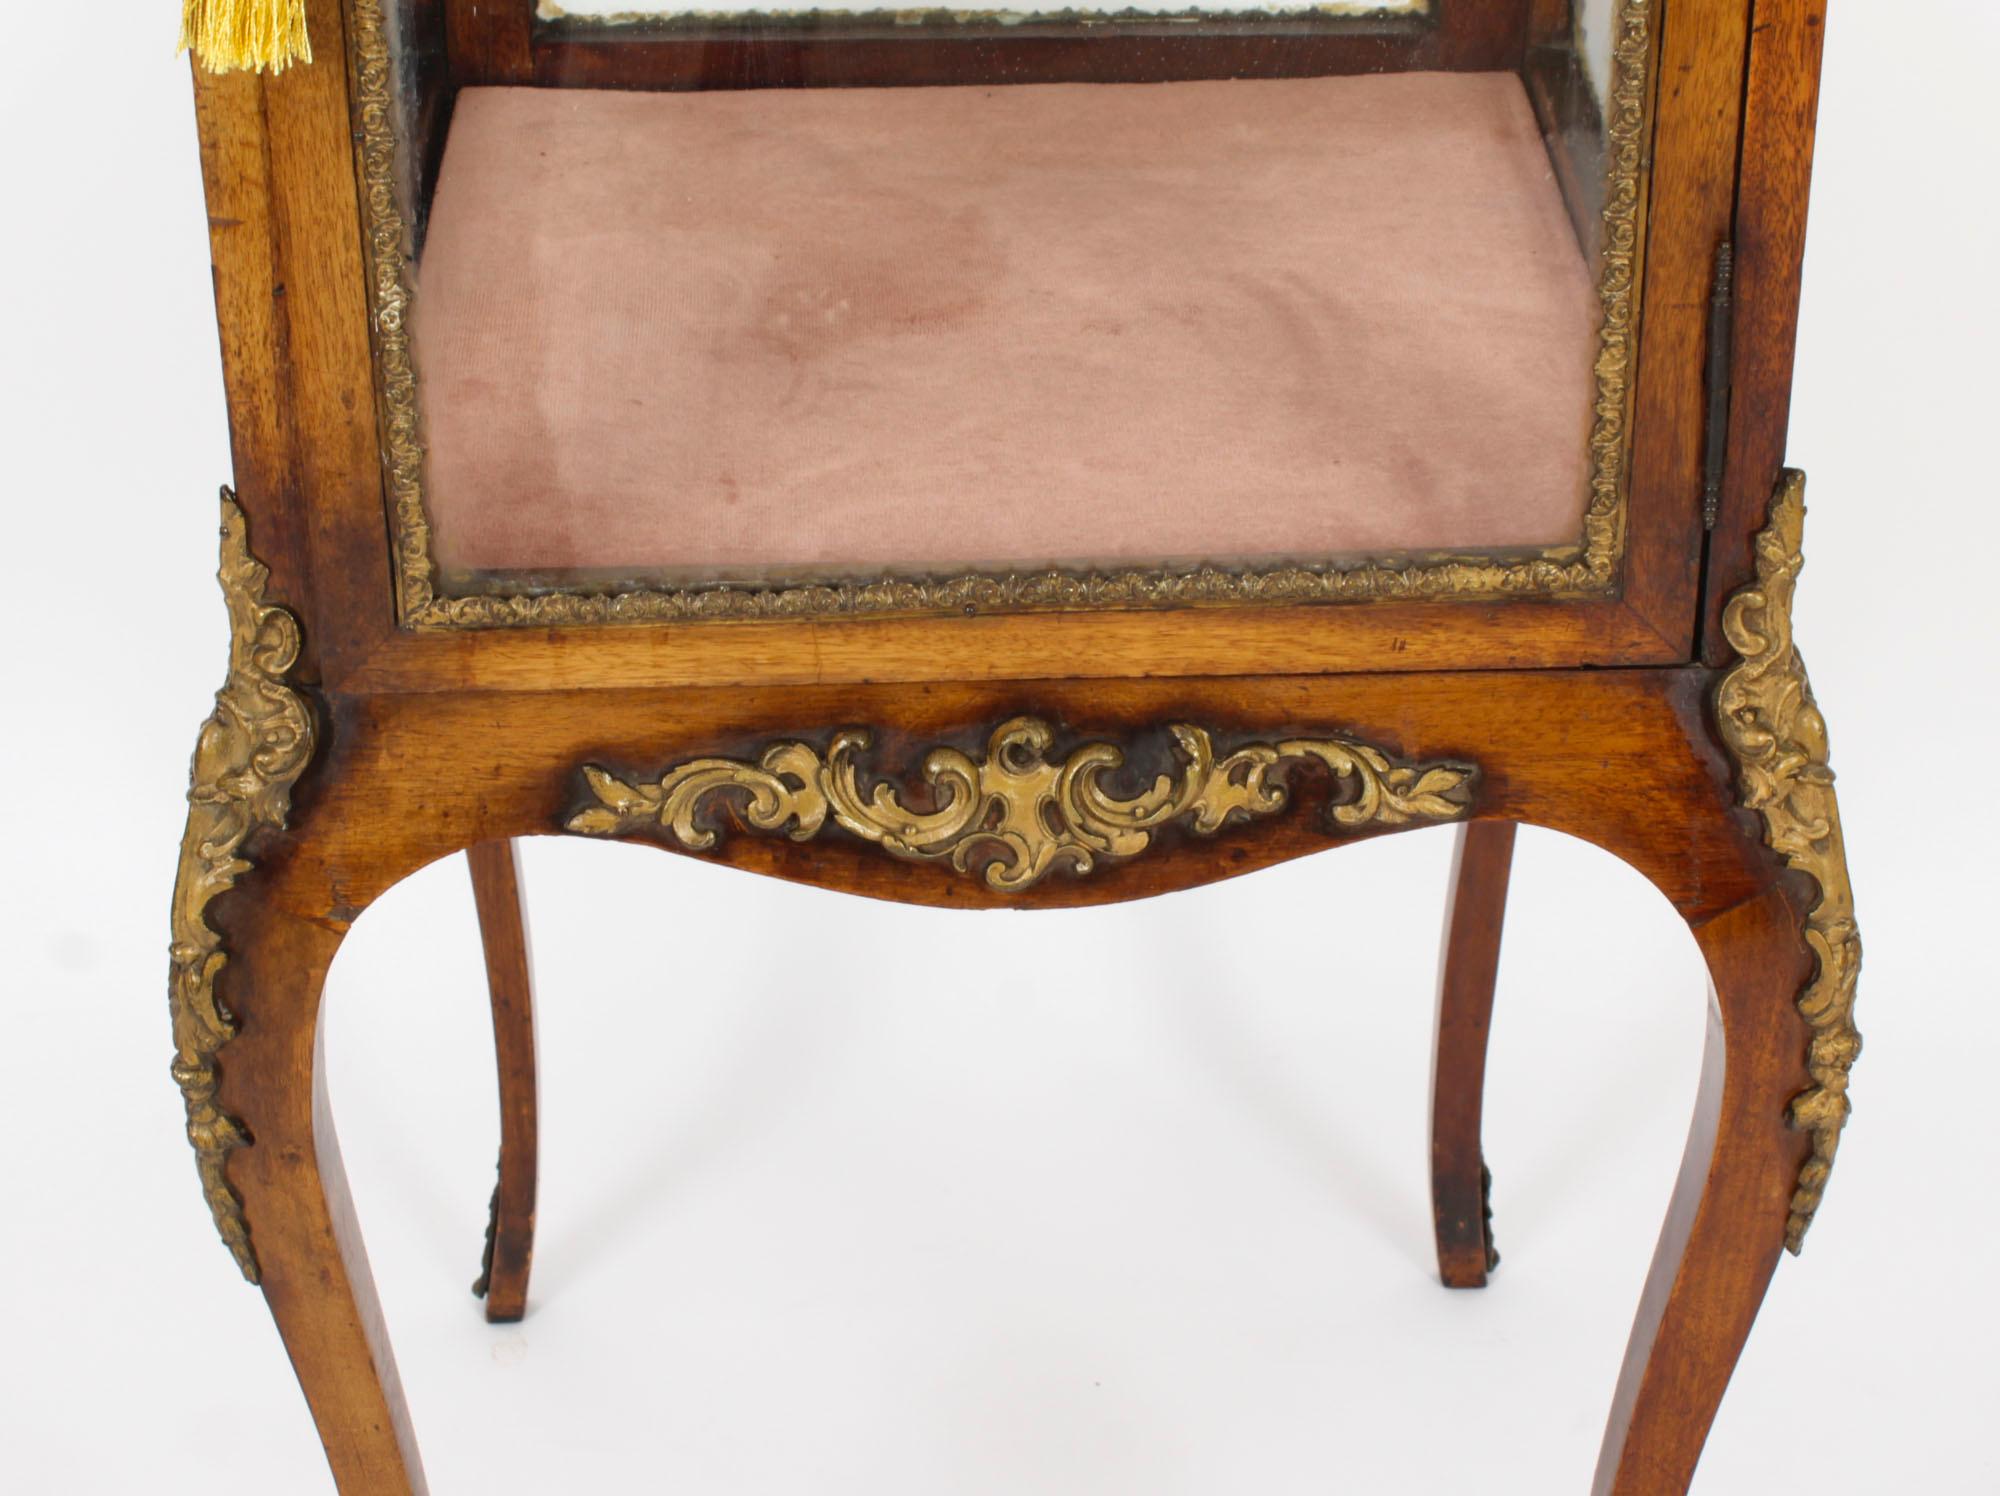 Antique Square Ormolu Mounted Vitrine Display Cabinet 19th Century For Sale 3